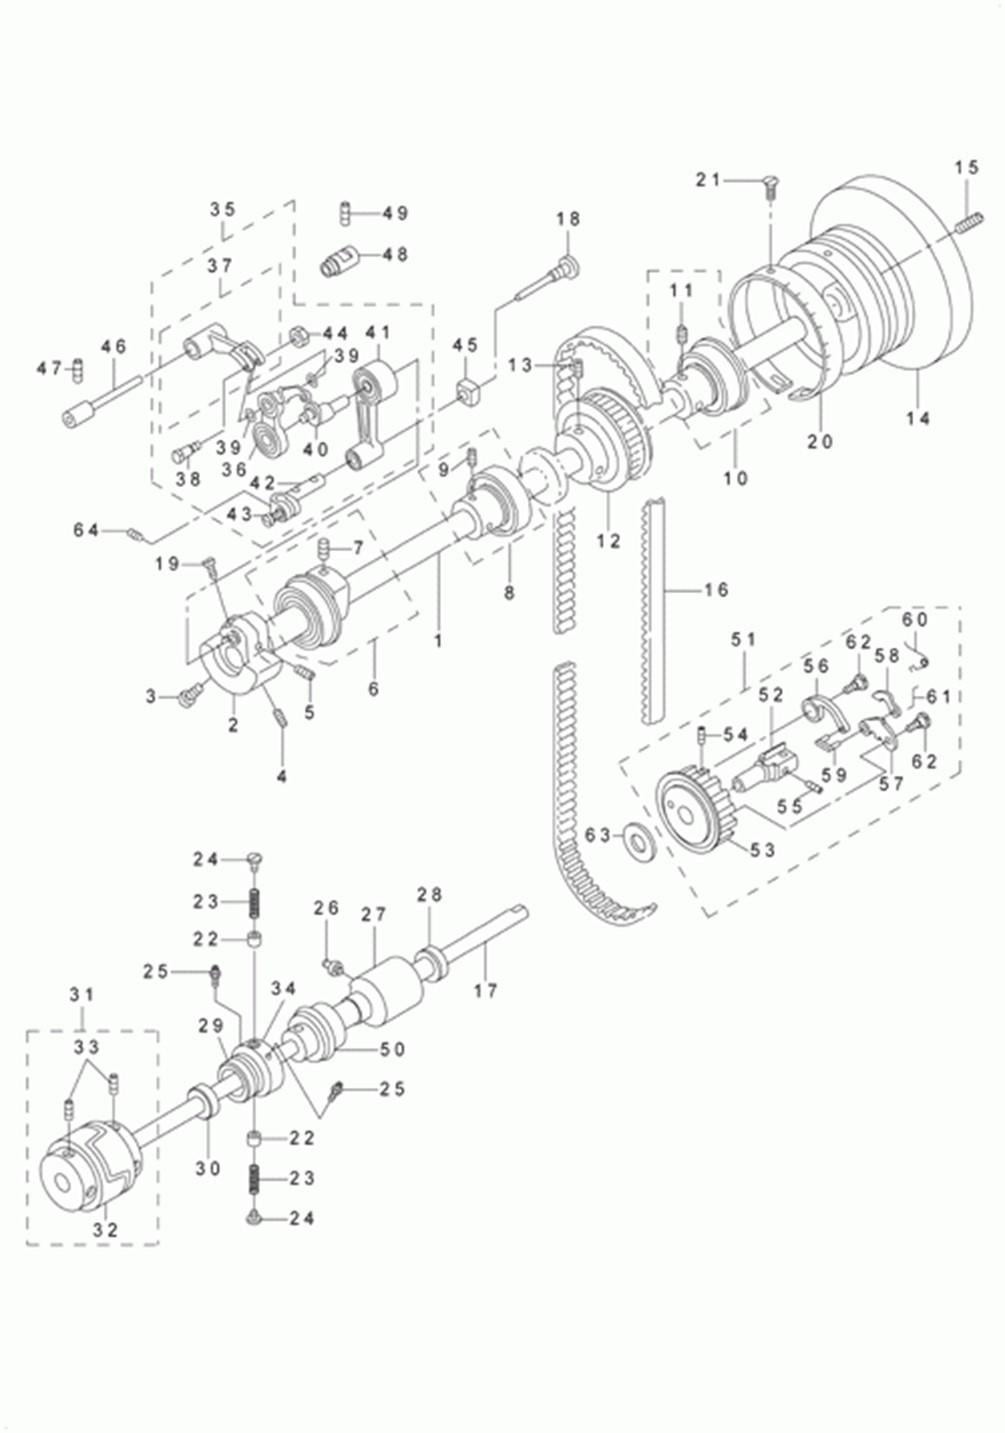 LU-2210N-7 - 2.MAIN SHAFT,HOOK DRIVING SHAFT DELIVERY& THREAD TAKE-UP LEVER COMPONENTS